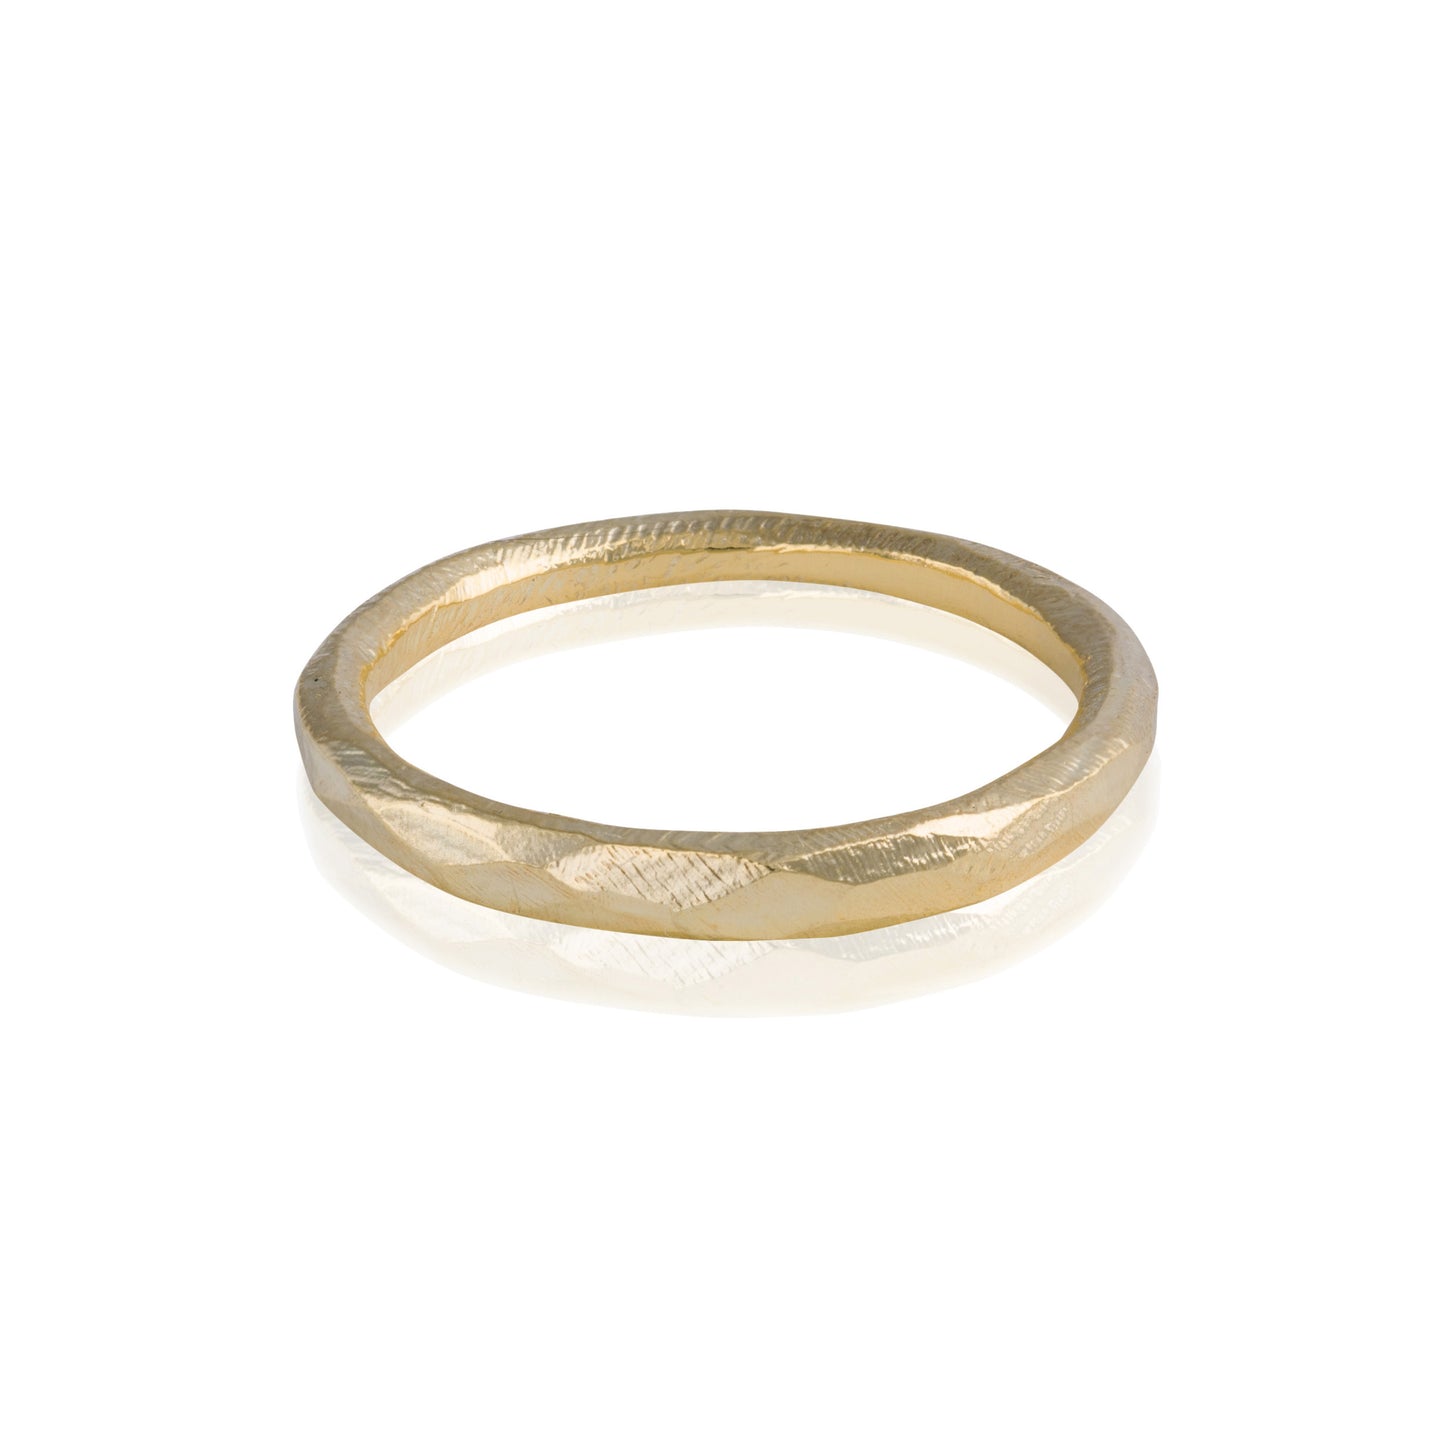 Faceted Hewn Ring